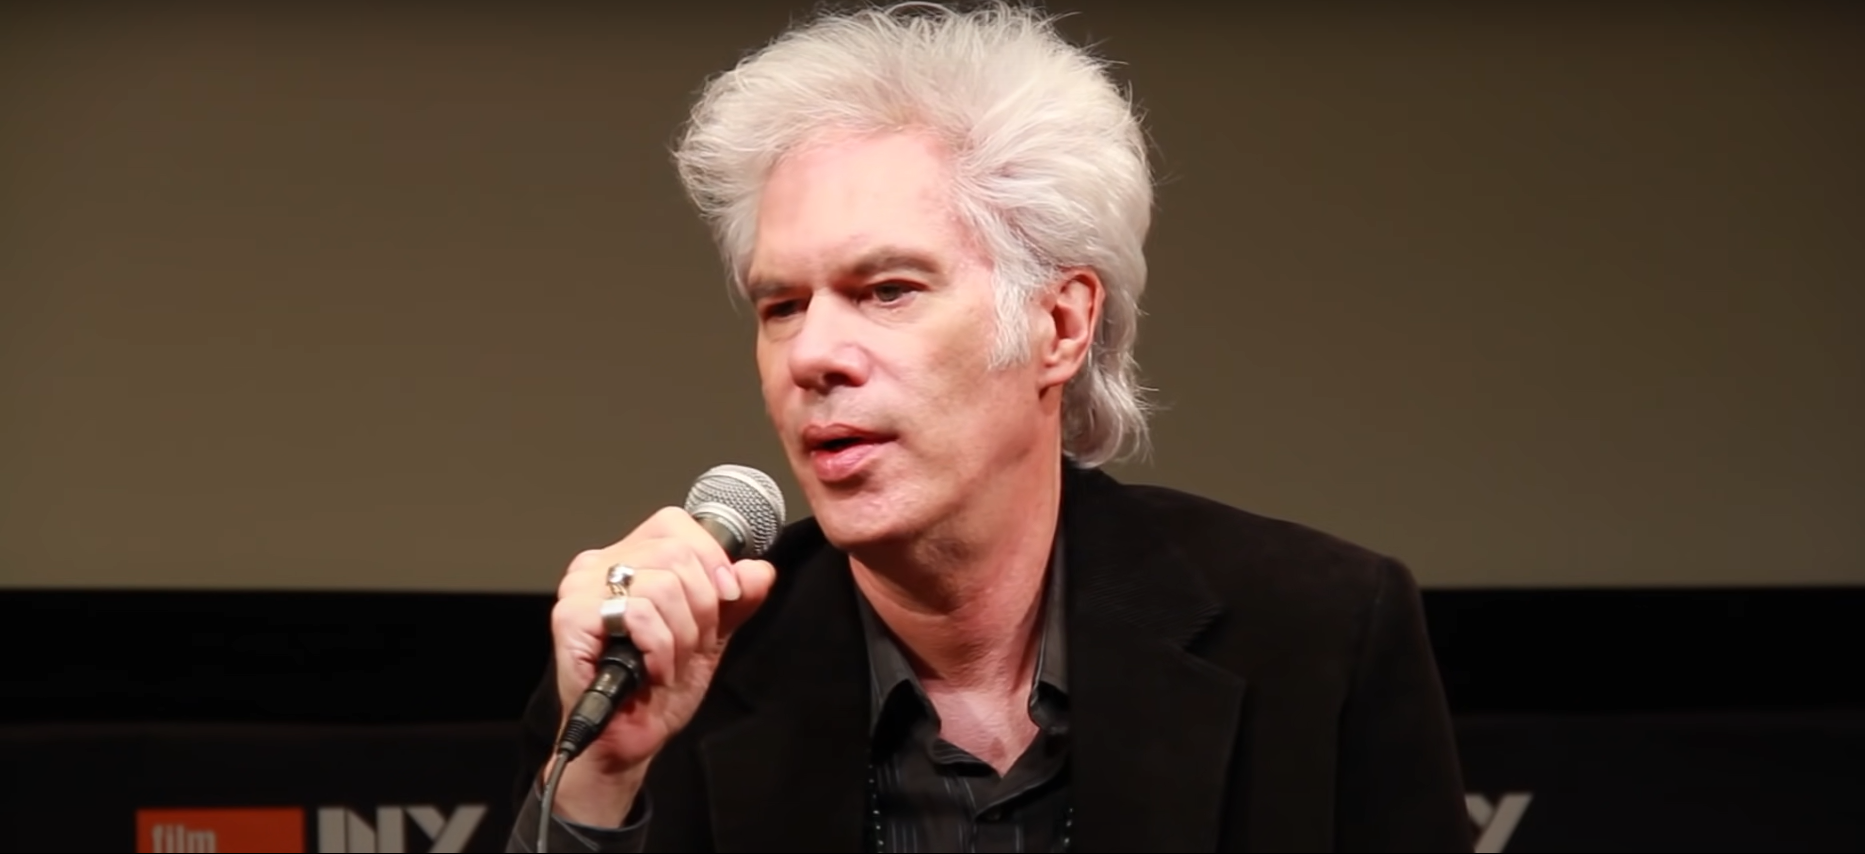 Jim Jarmusch’s New Film Titled Father Mother Sister Brother; Filming Has Begun in West Milford and Paris